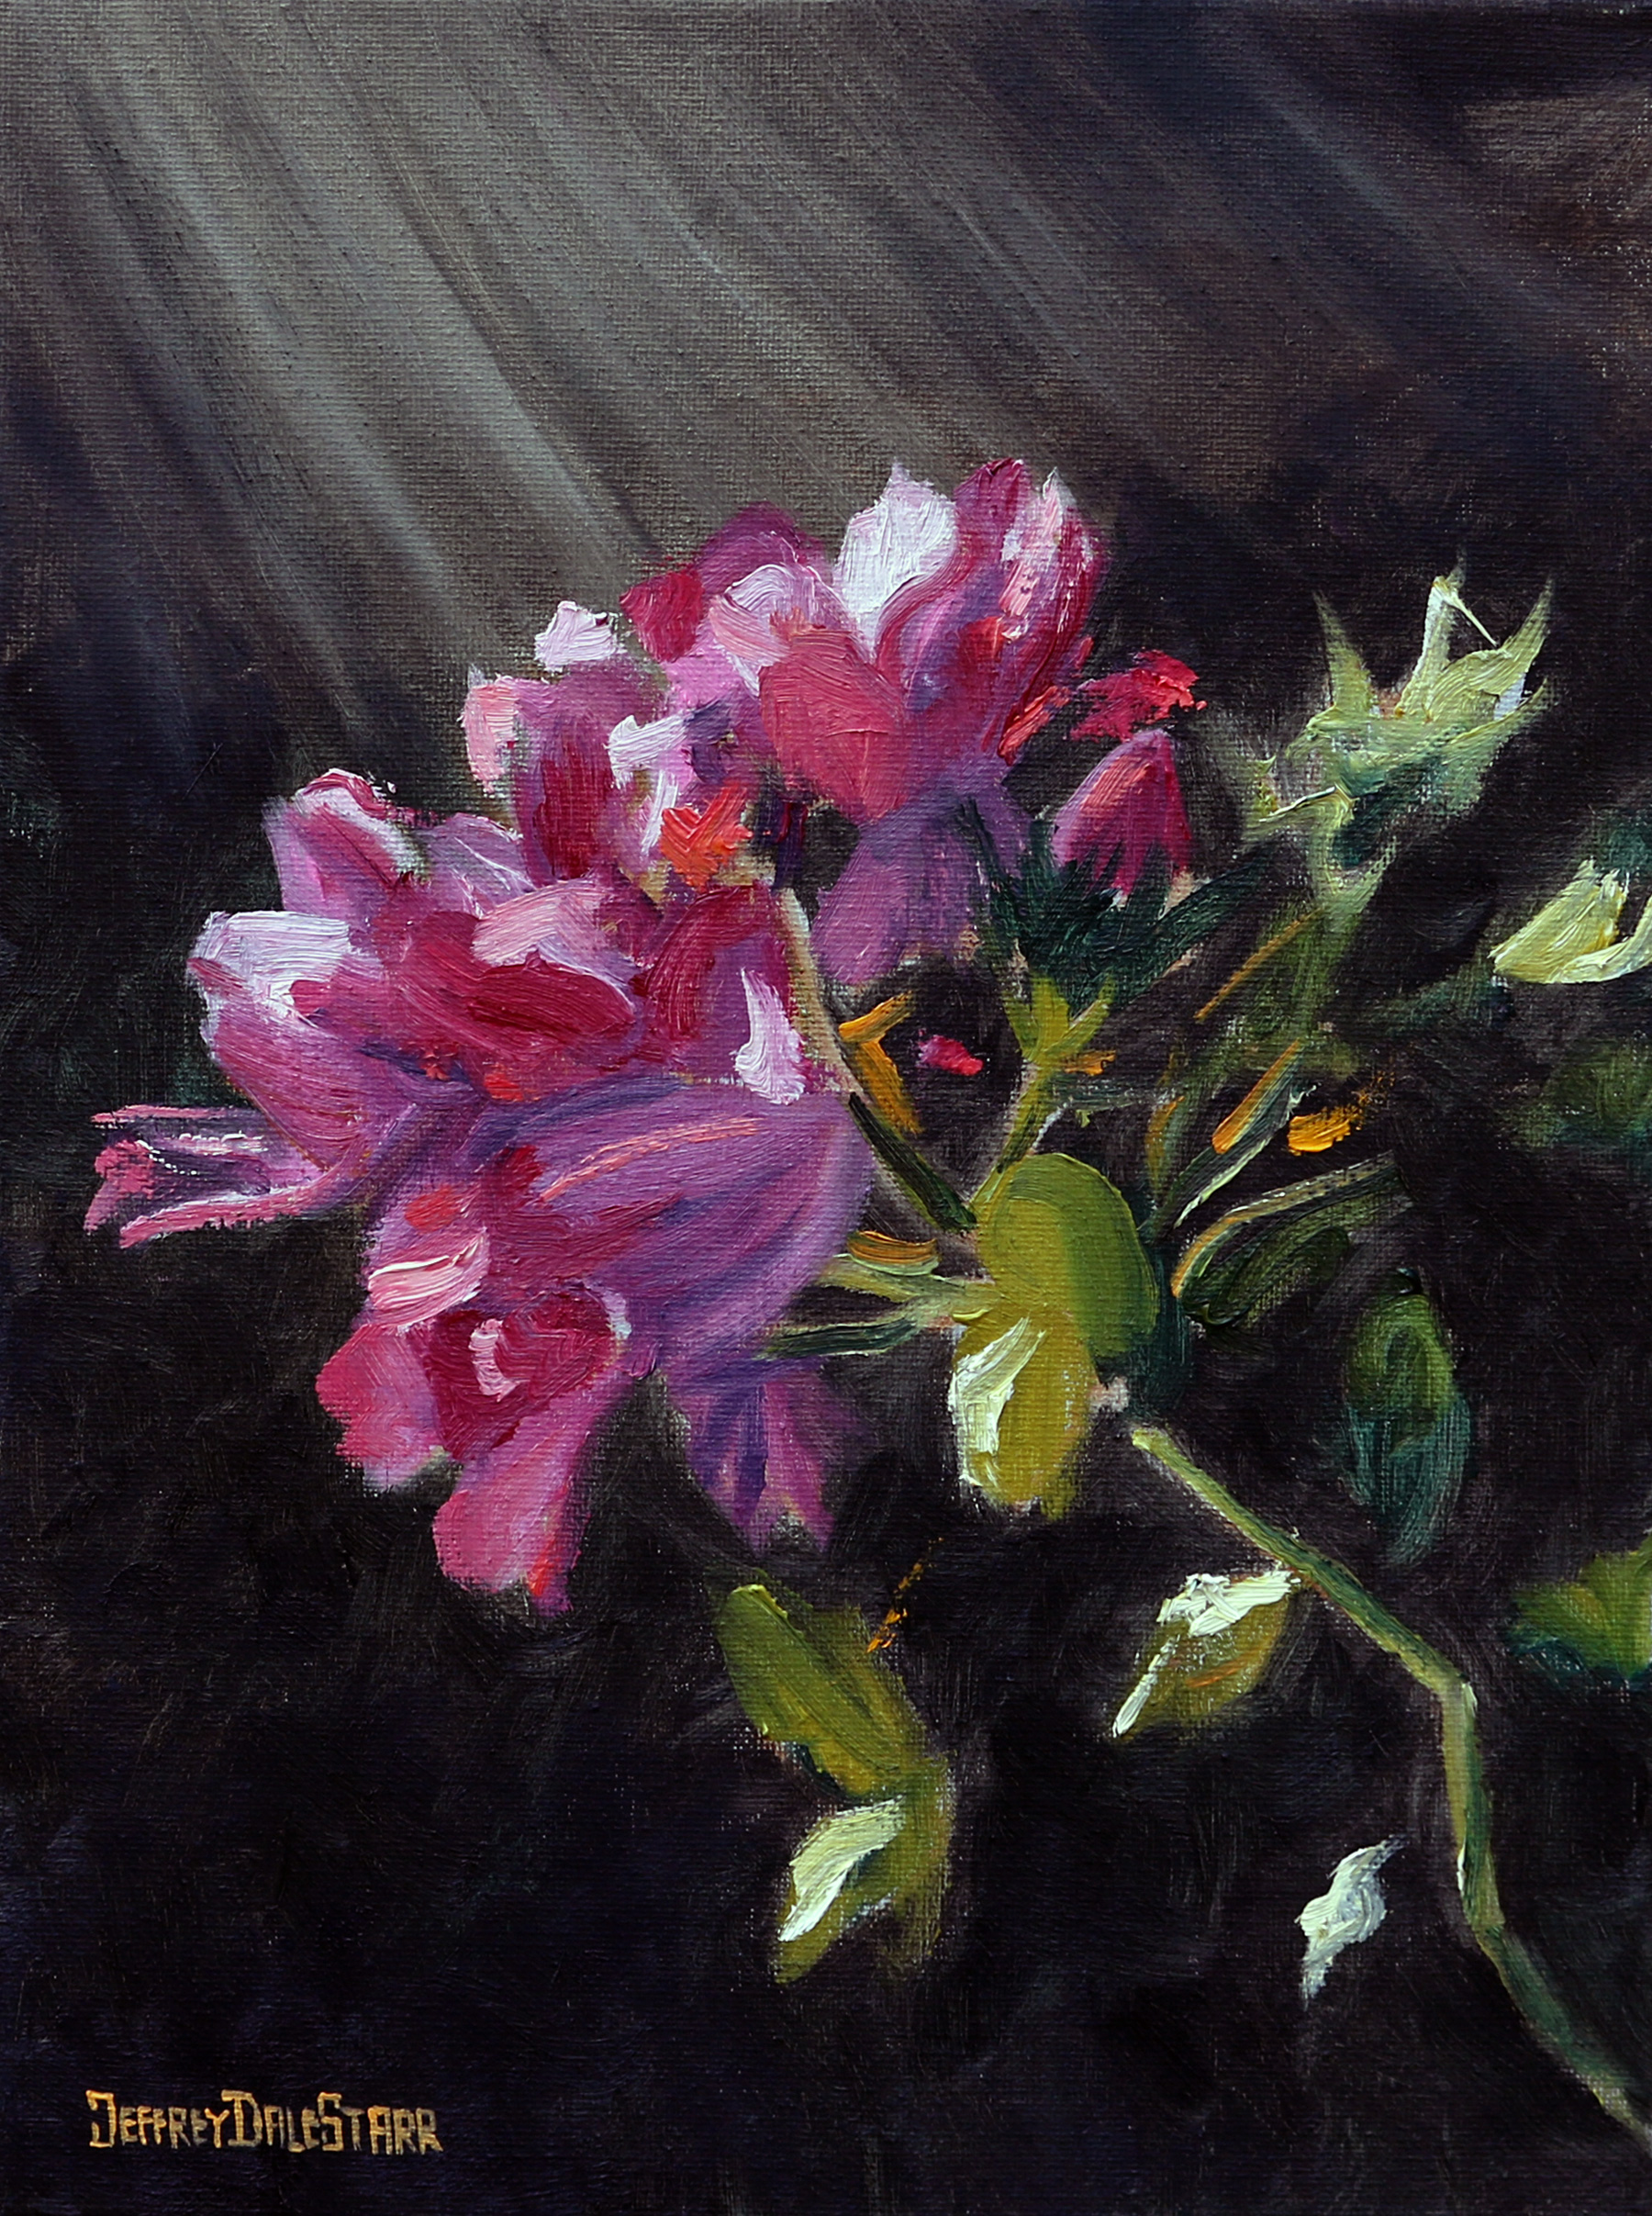 Oil painting "Knockout Roses Bathed in Sunlight" by Jeffrey Dale Starr